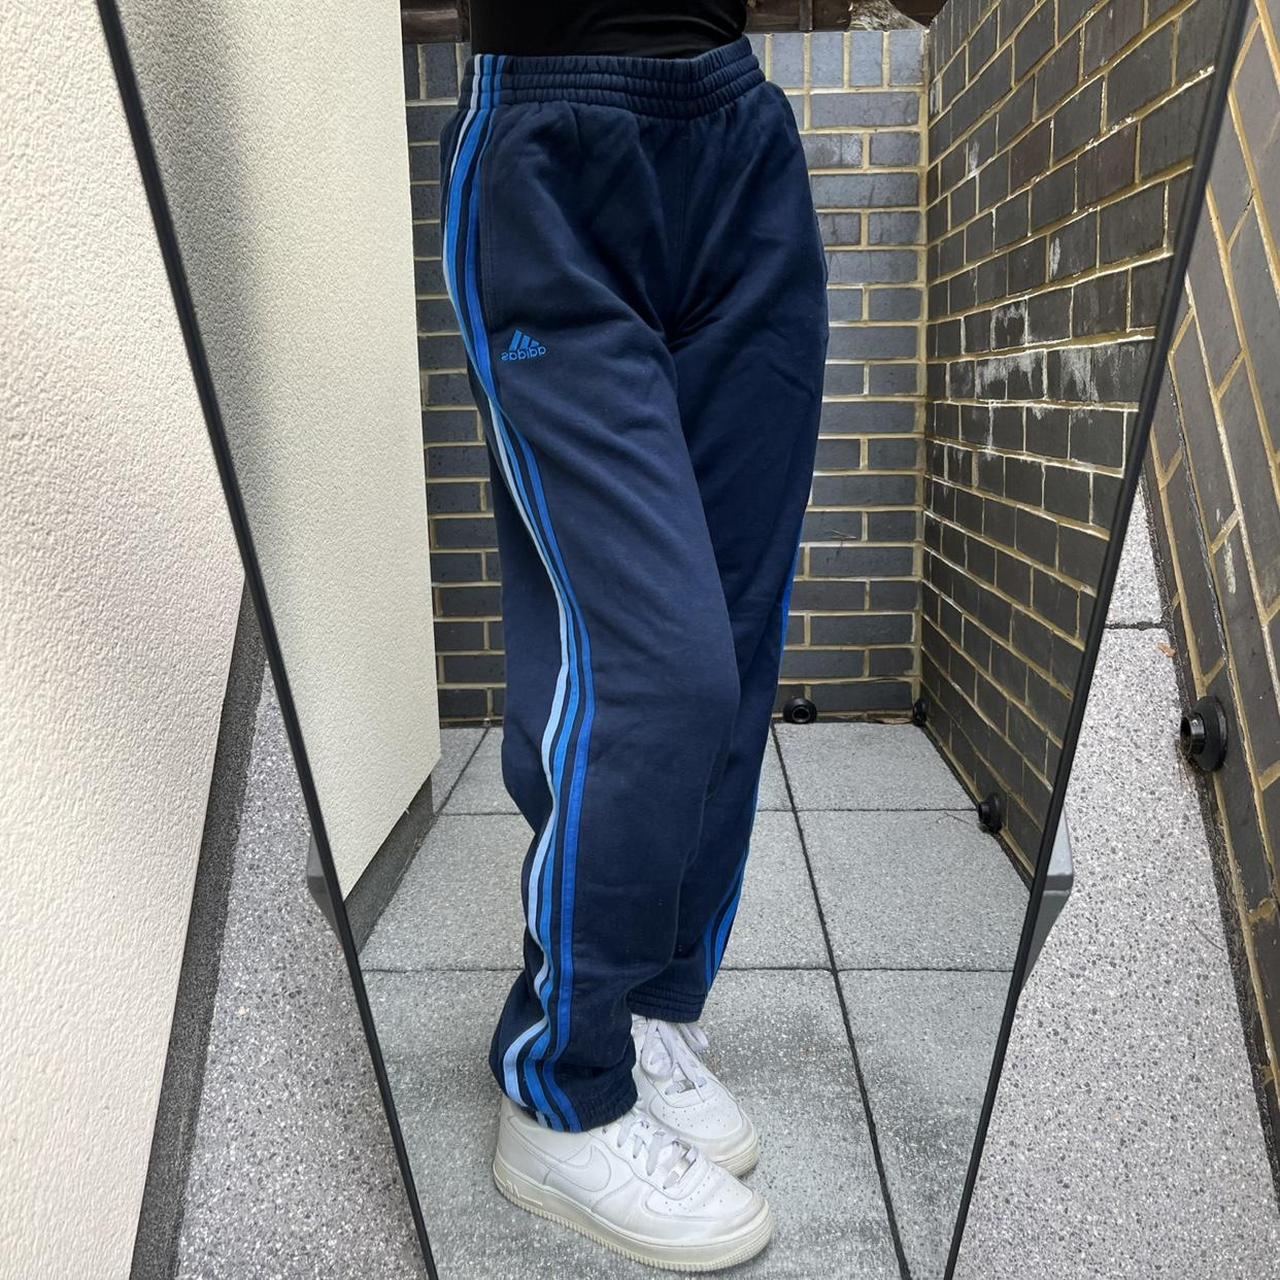 Adidas joggers. Adidas joggers in blue and blue fade... - Depop